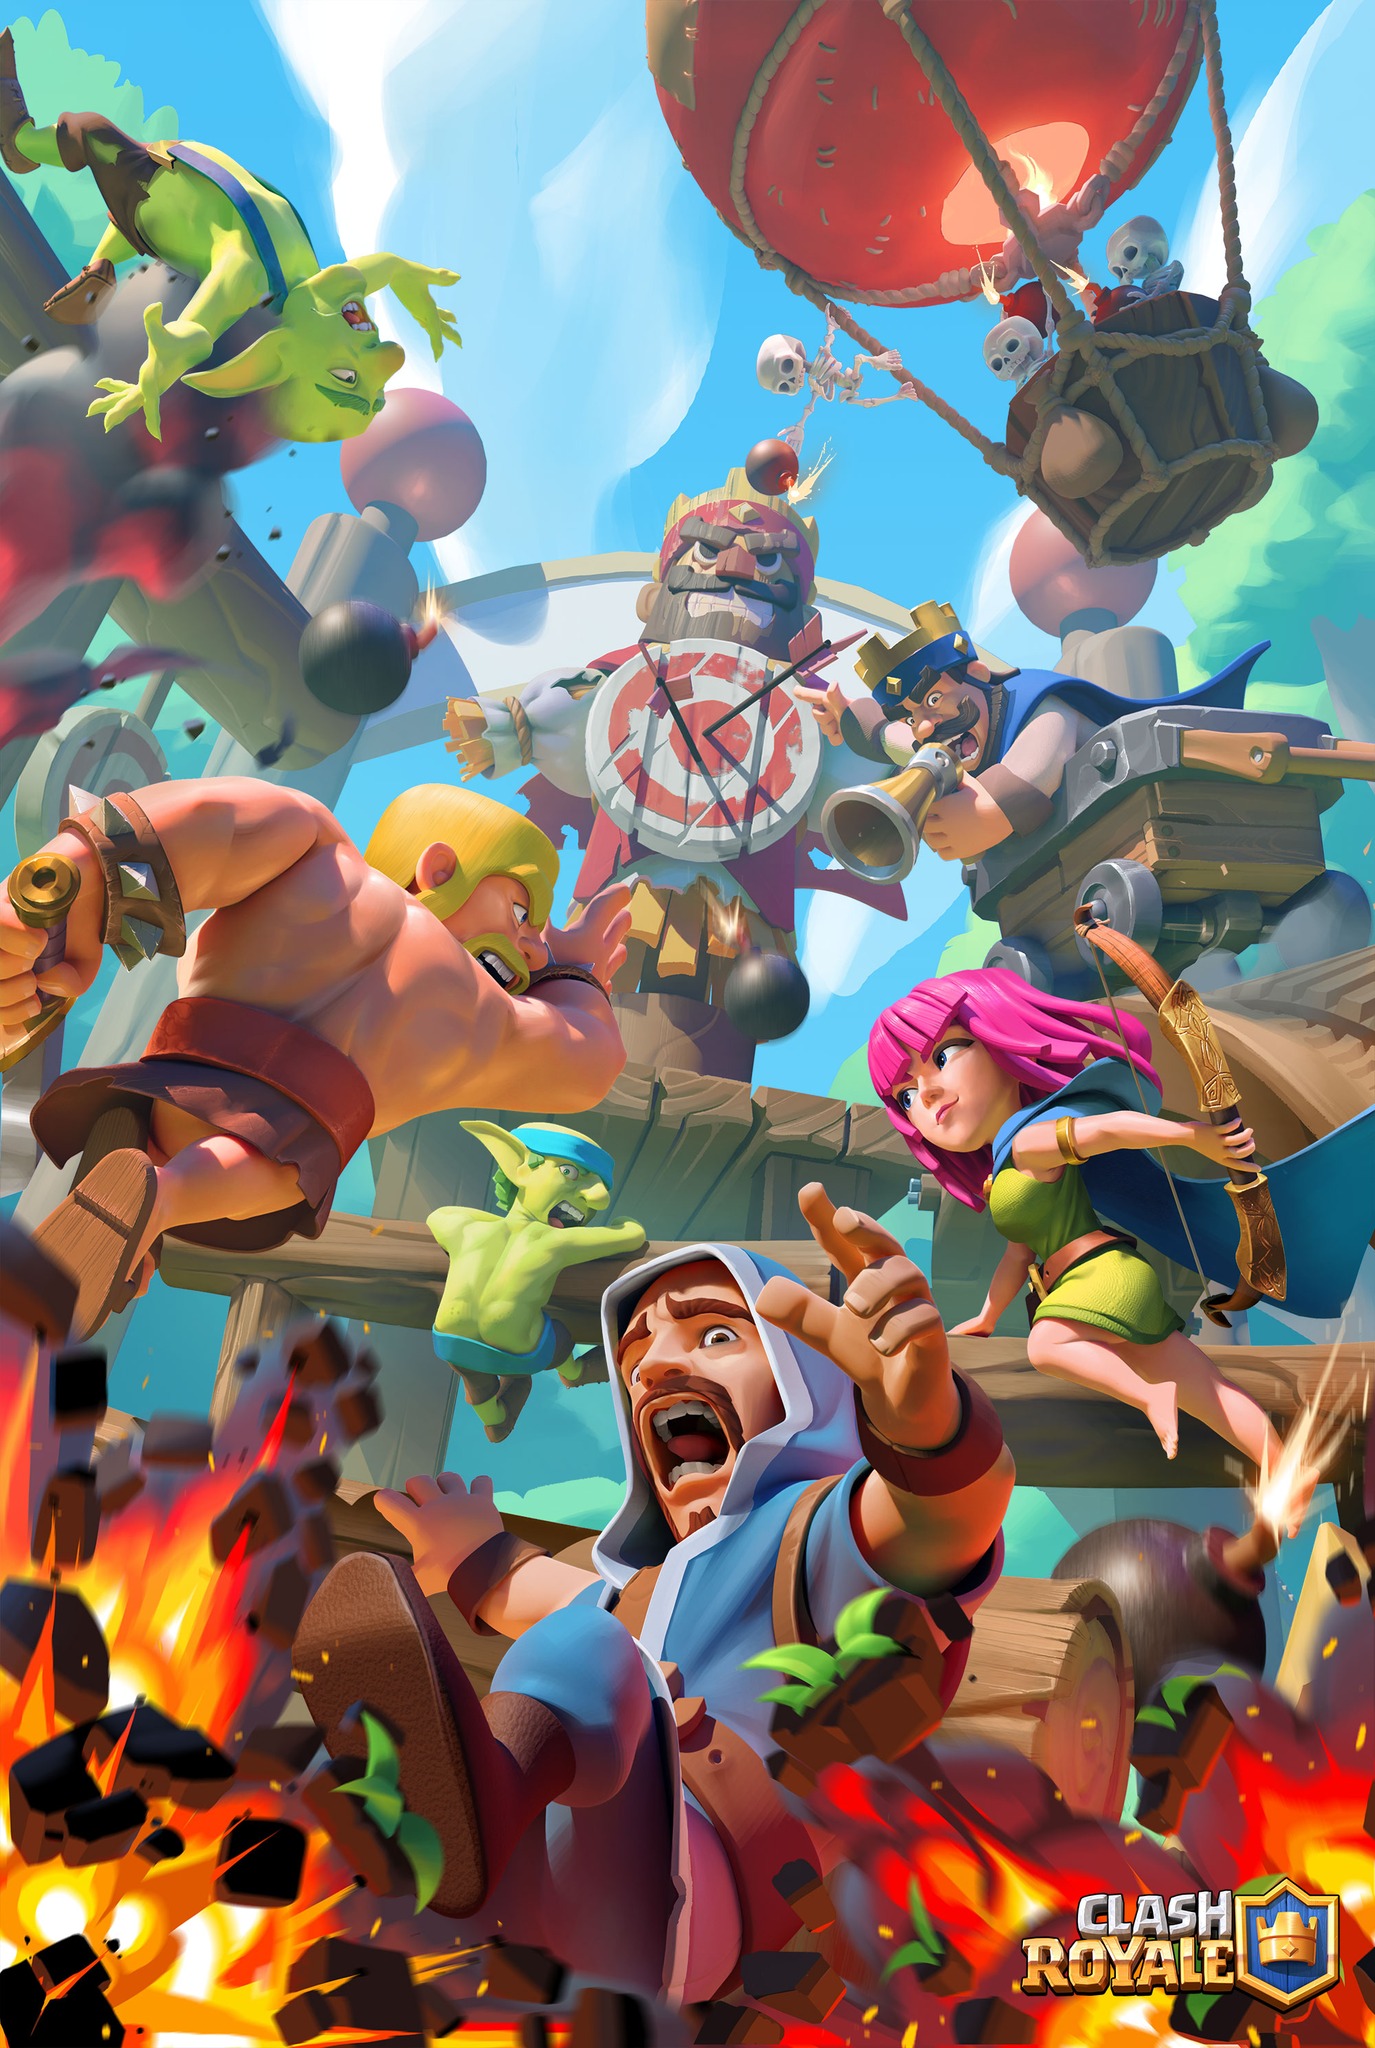 Clash Royale Loading Screen Video Game Art Watermarked Goblin Barbarian Portrait Display Archer Vide 1375x2048